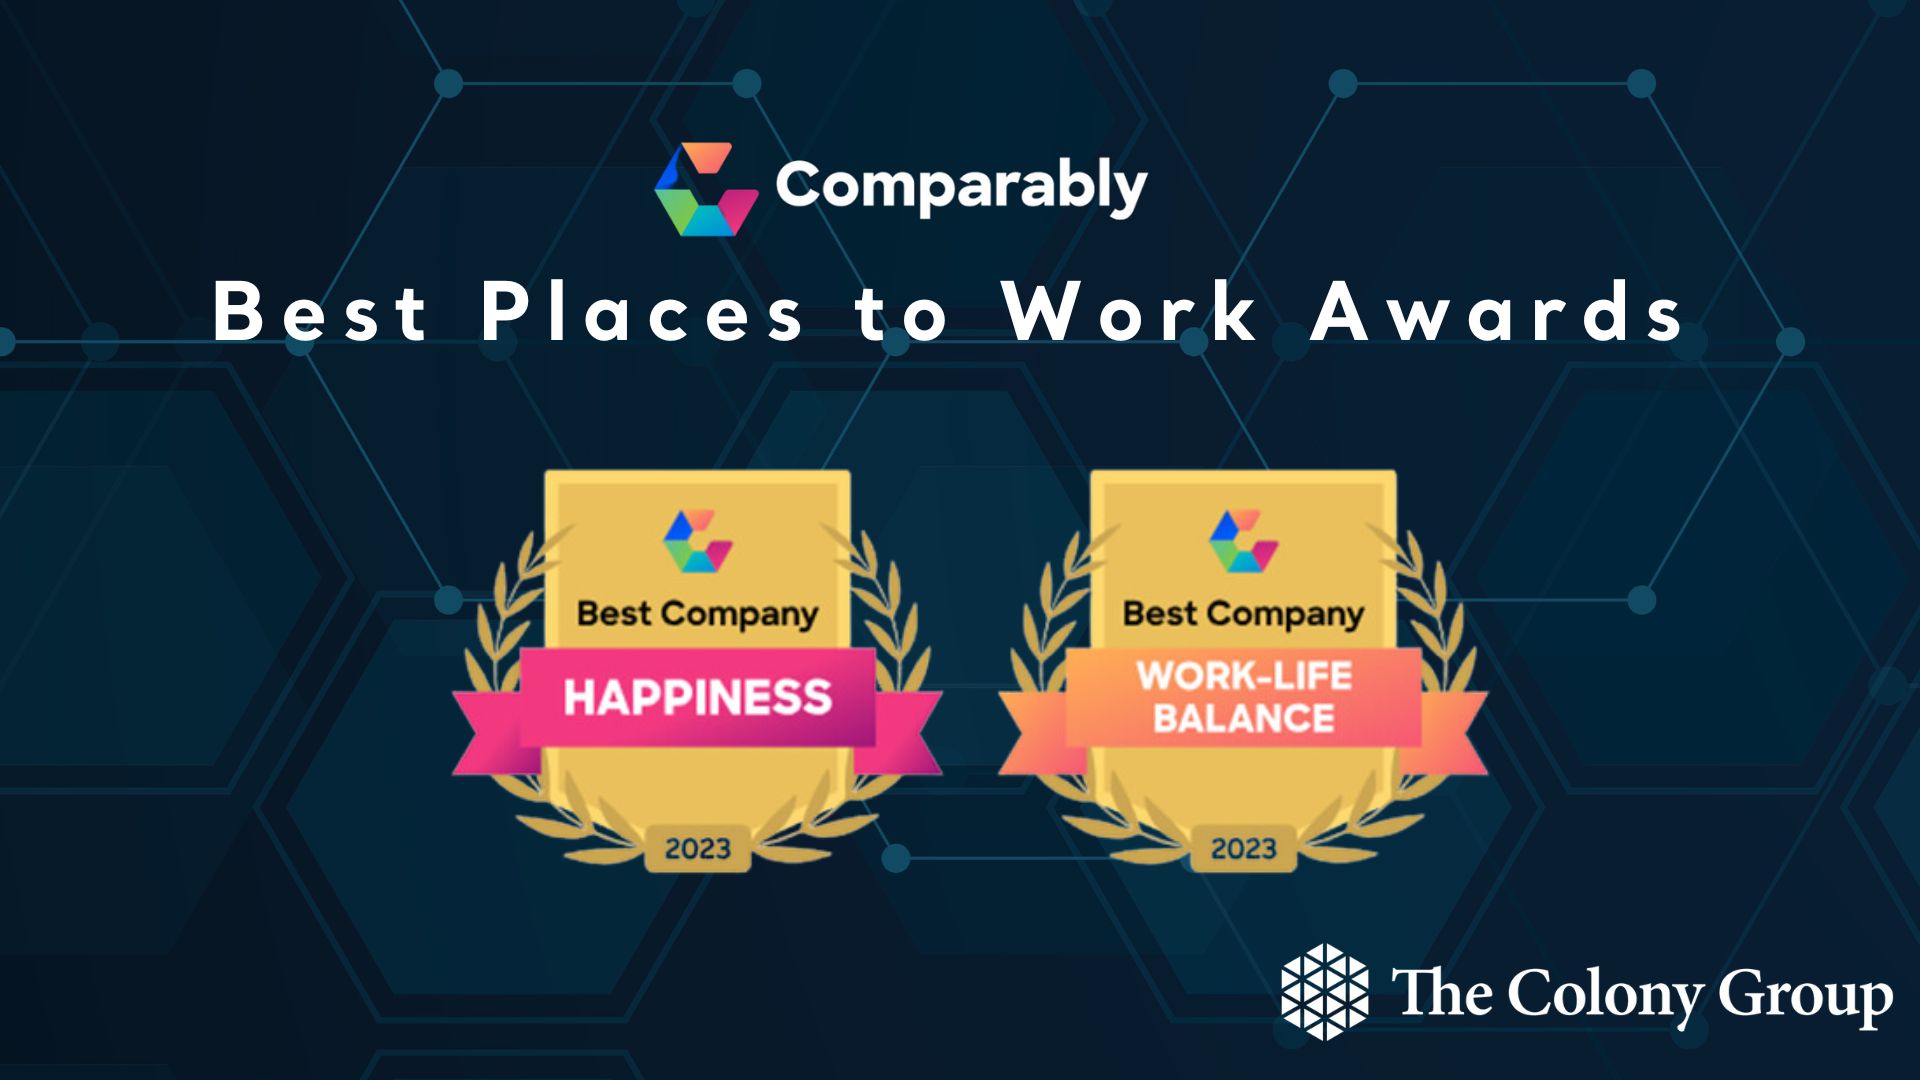 Happiest Employees and Employees with Best Company Work-Life Balance Recognized at The Colony Group